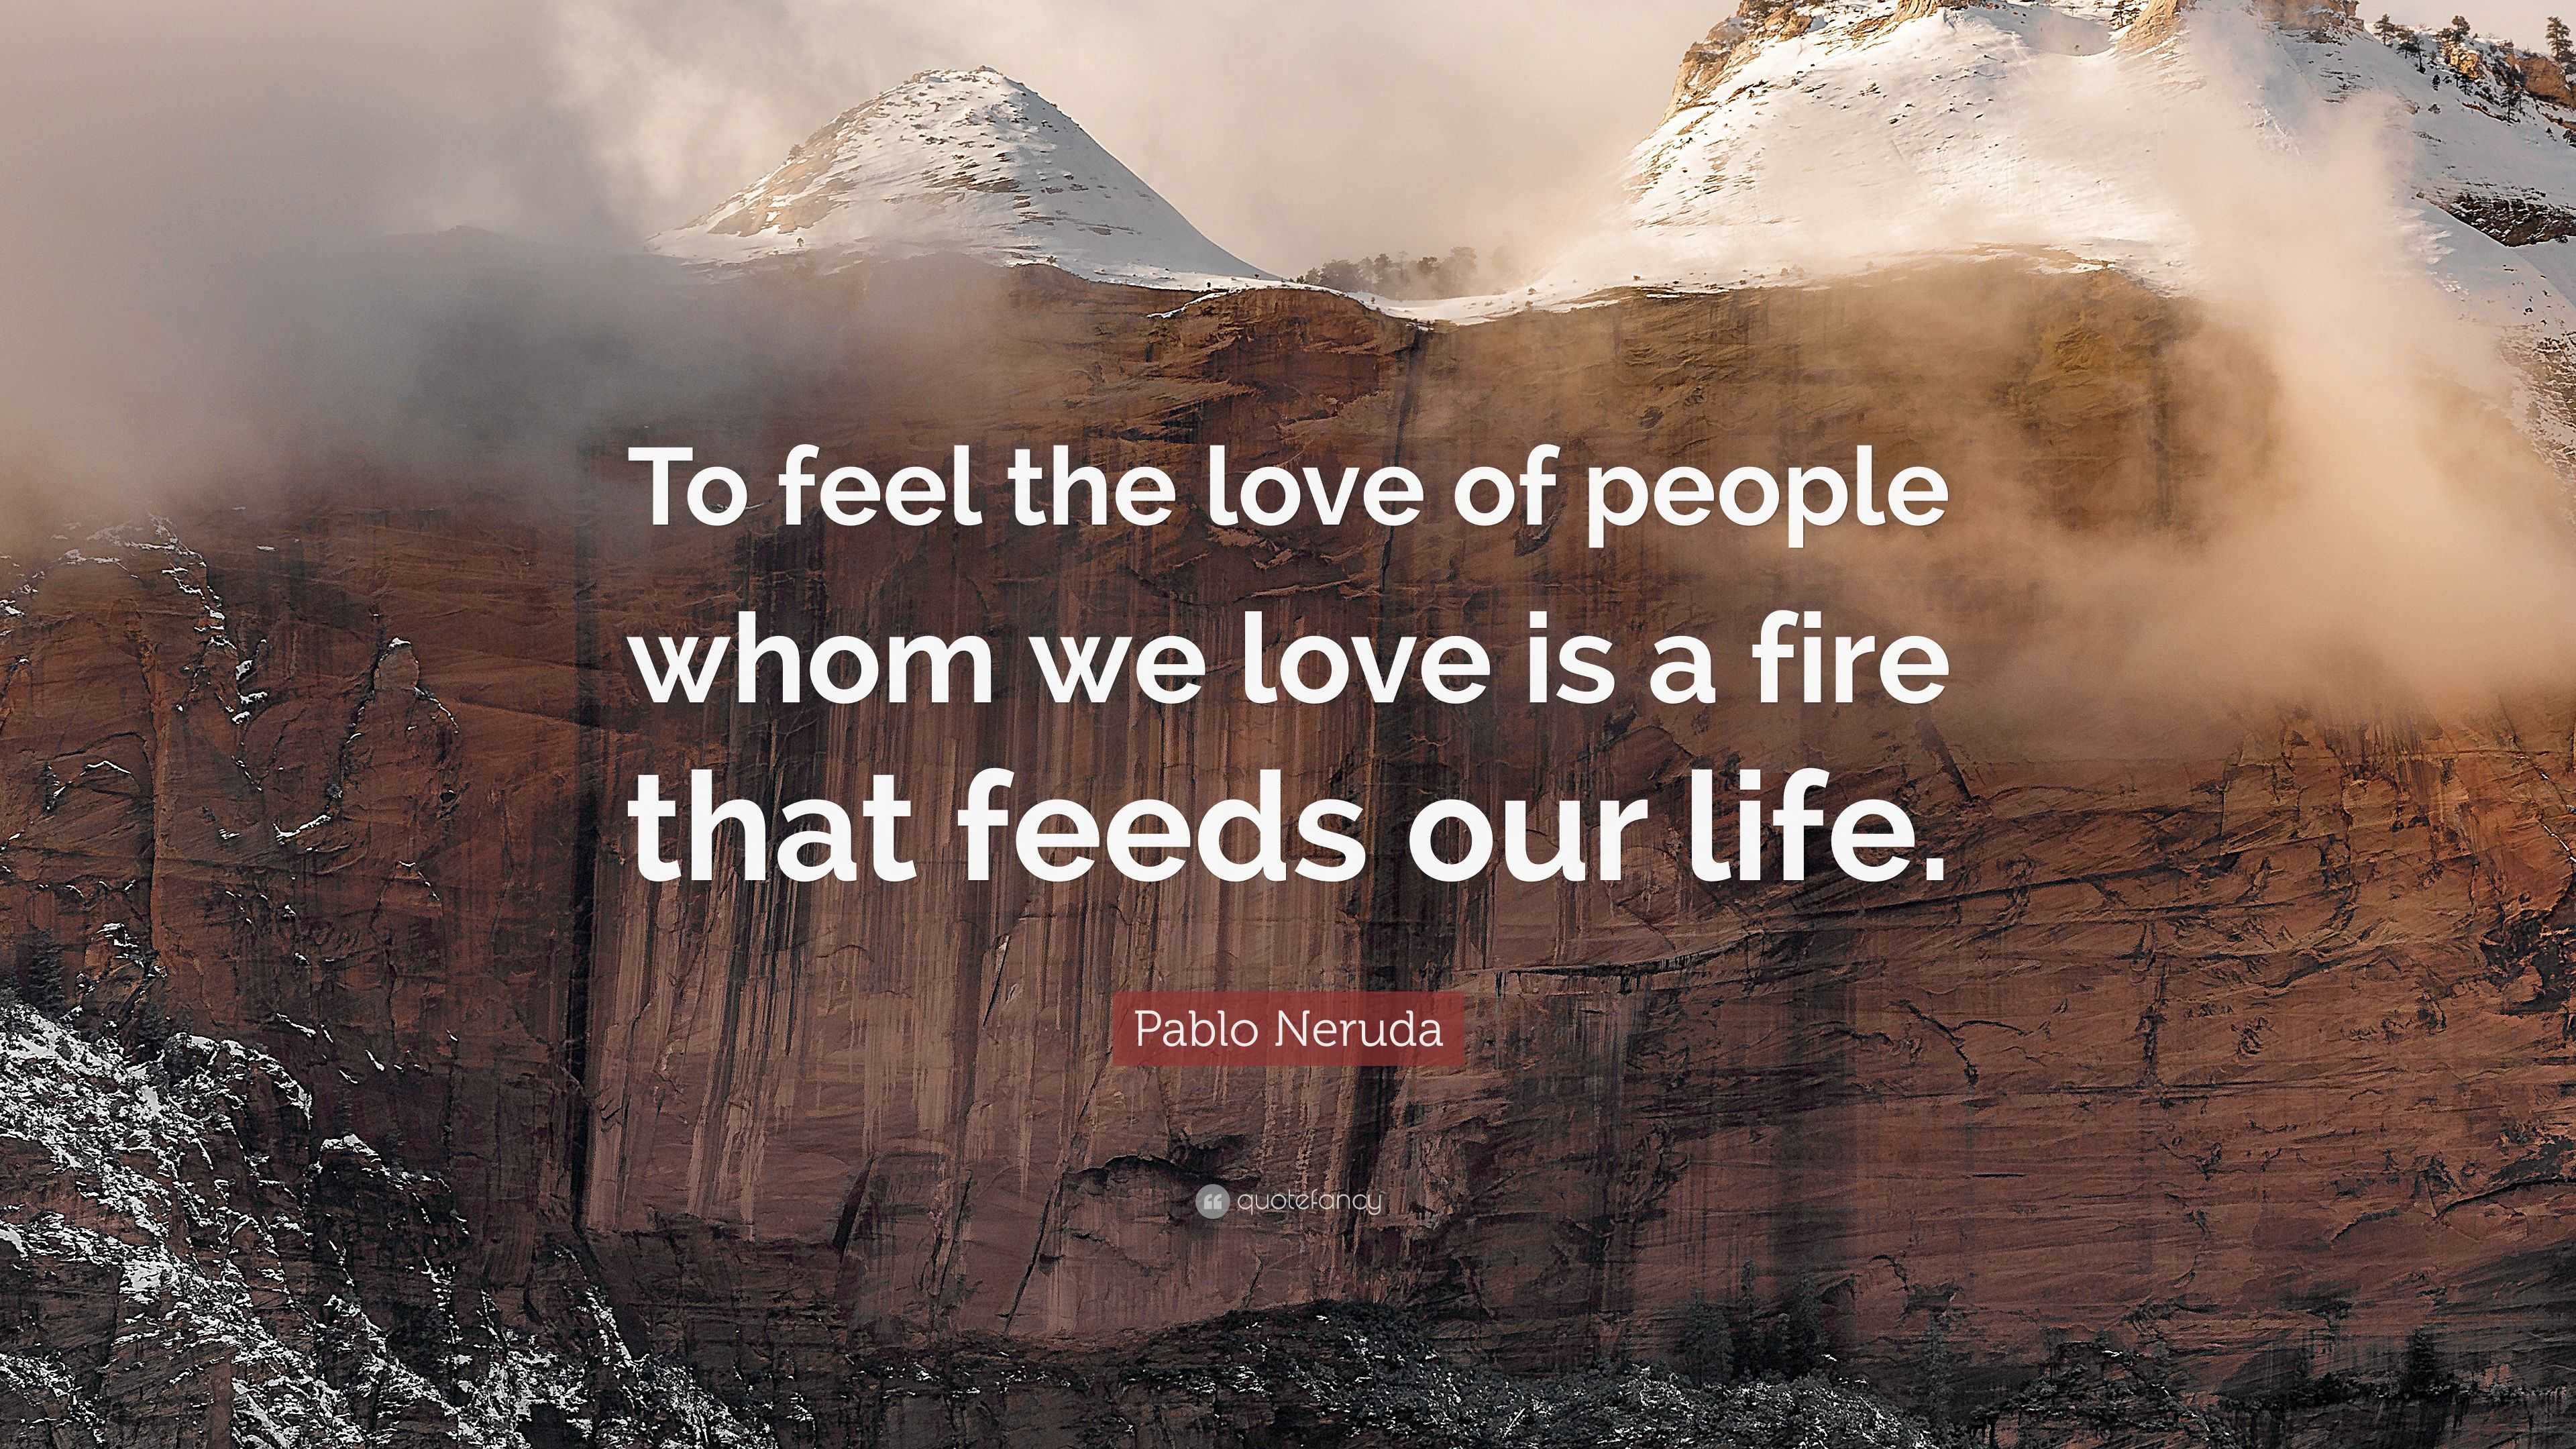 journey one love feeds the fire